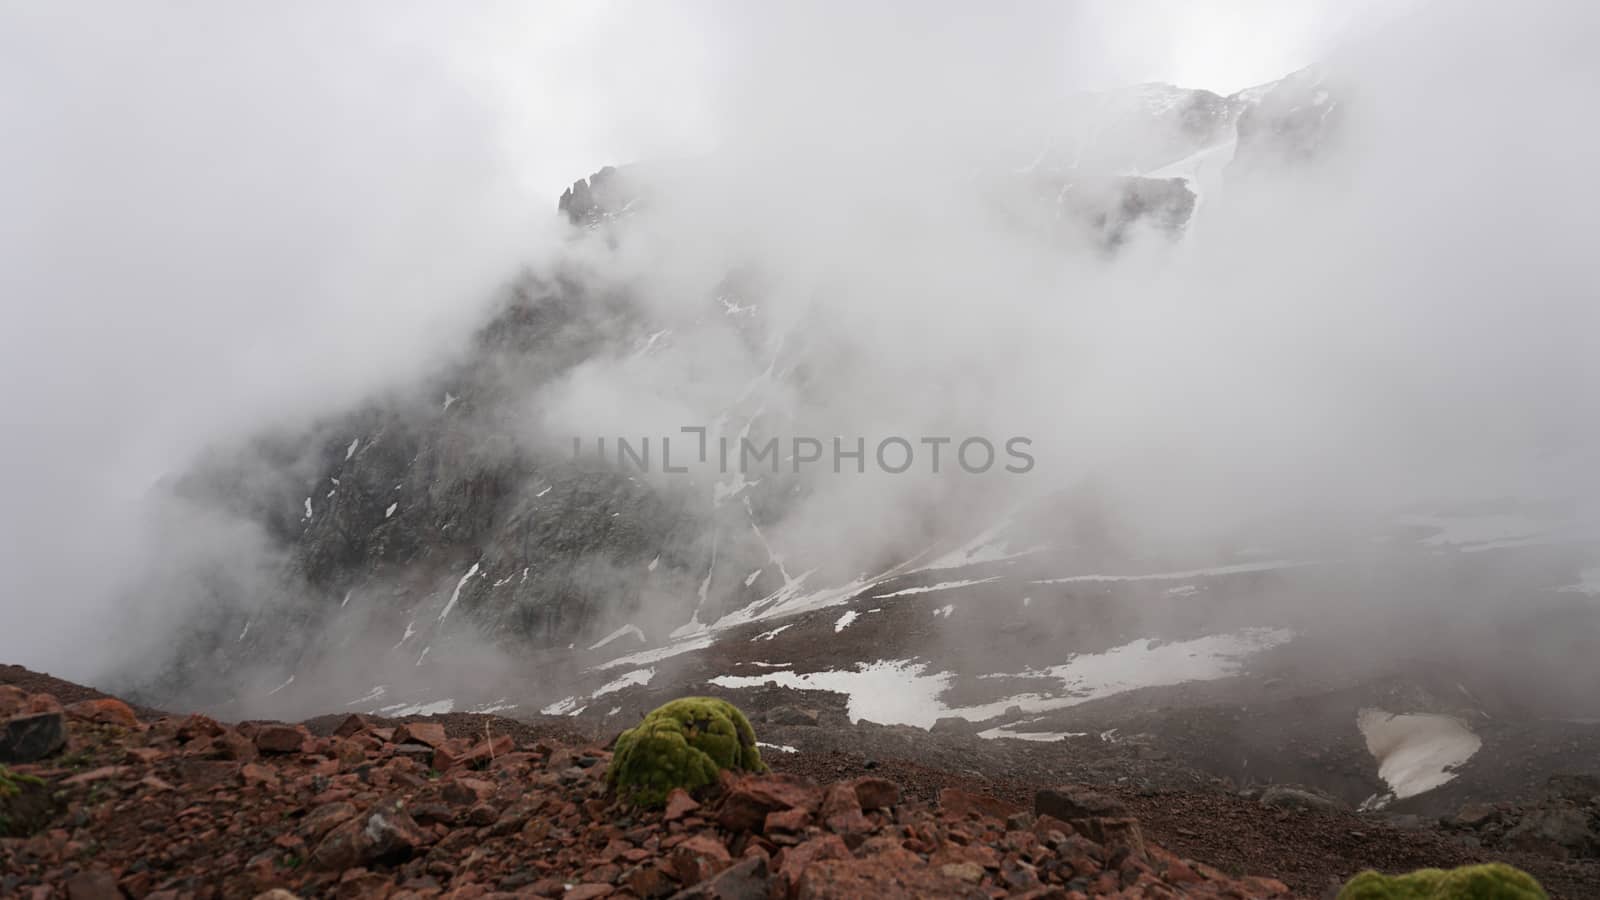 White clouds and snowy peaks. A lot of big stones. Steep cliffs, sometimes covered with white snow. Clouds float through the mountain tops. Moss grows in places. Mountains of the TRANS-ili Alatau.